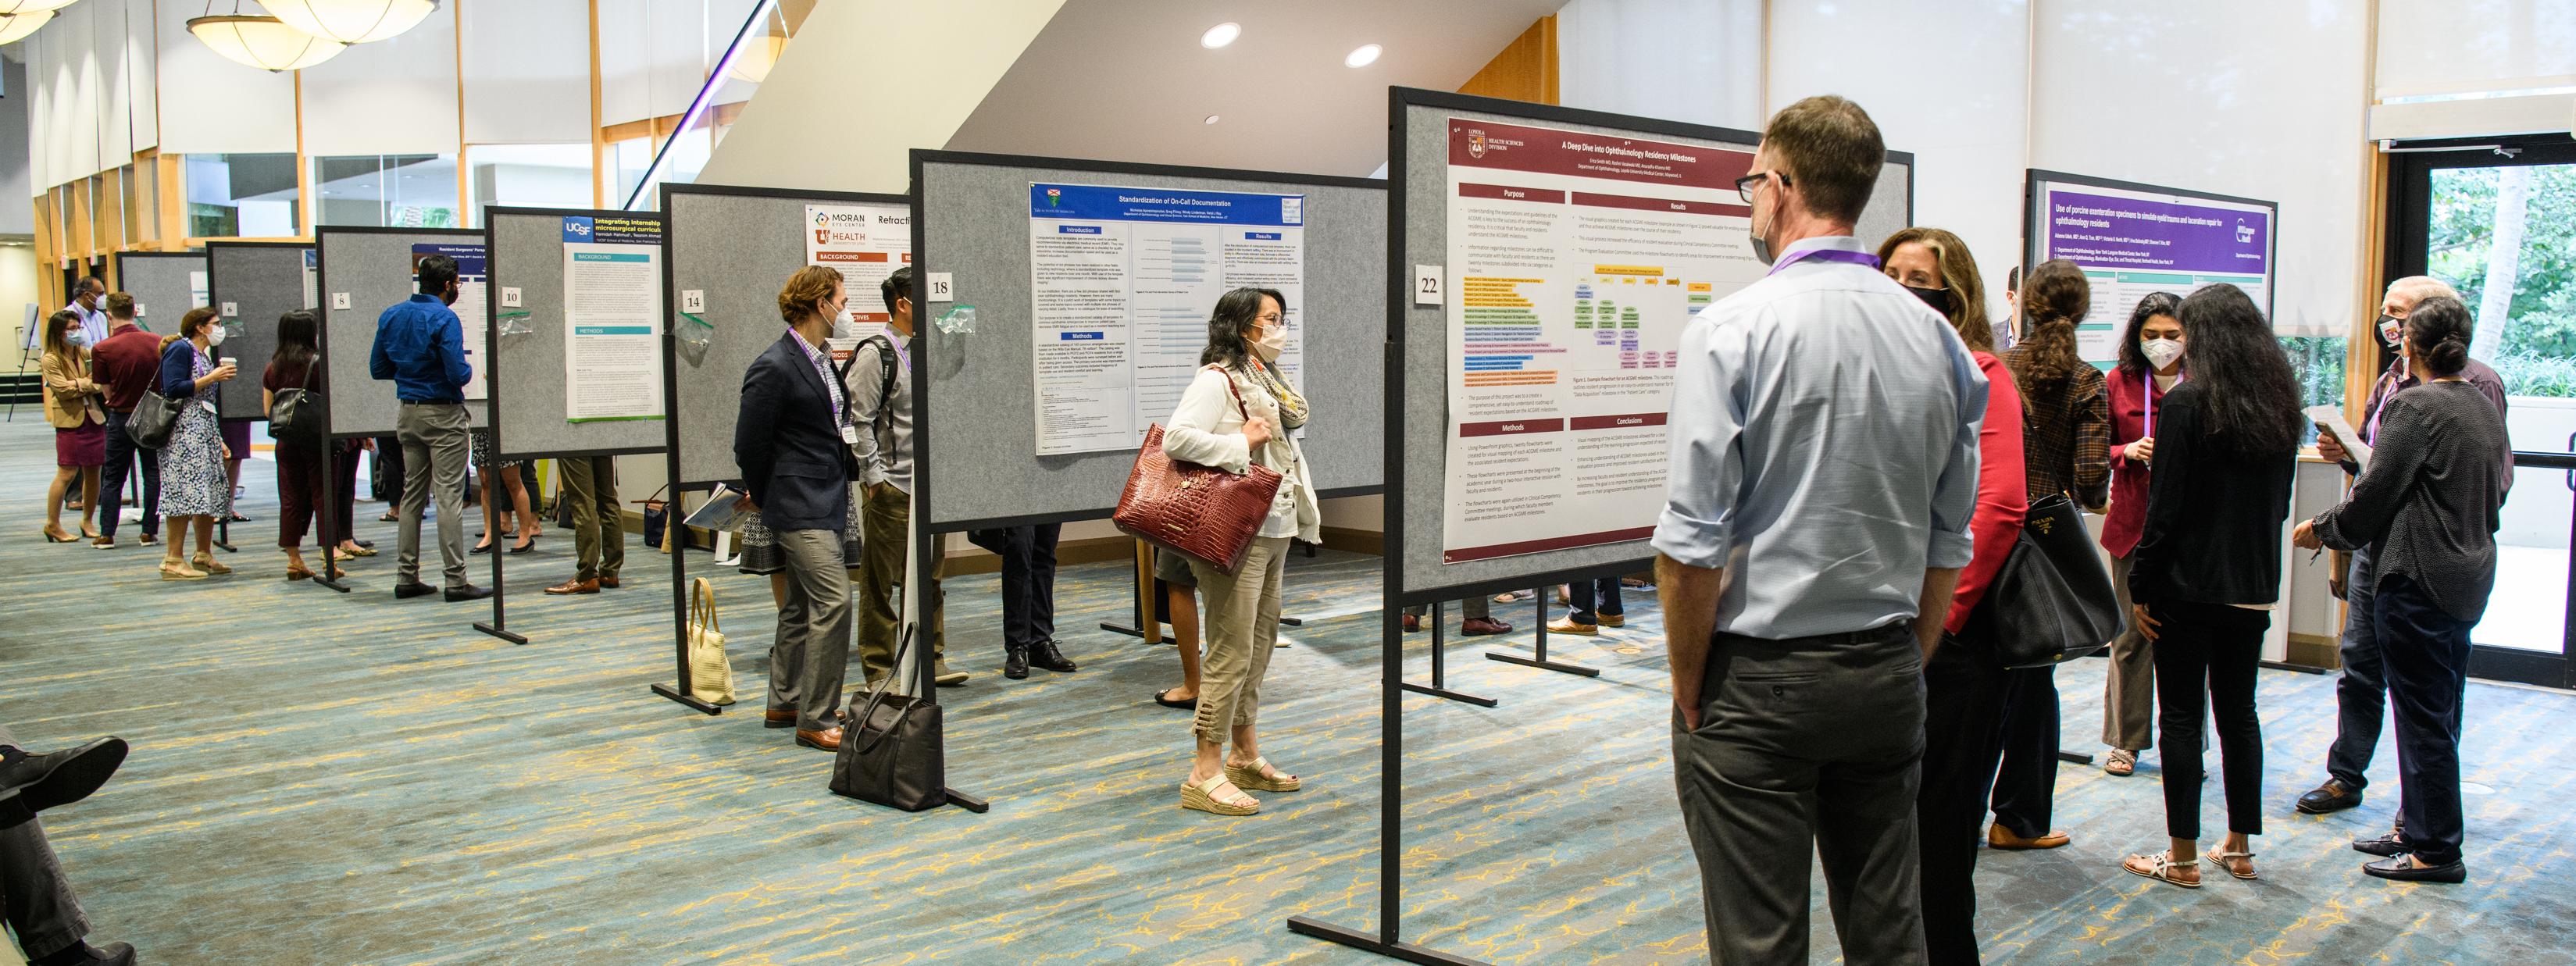 AUPO 2022 Annual Meeting Poster Session